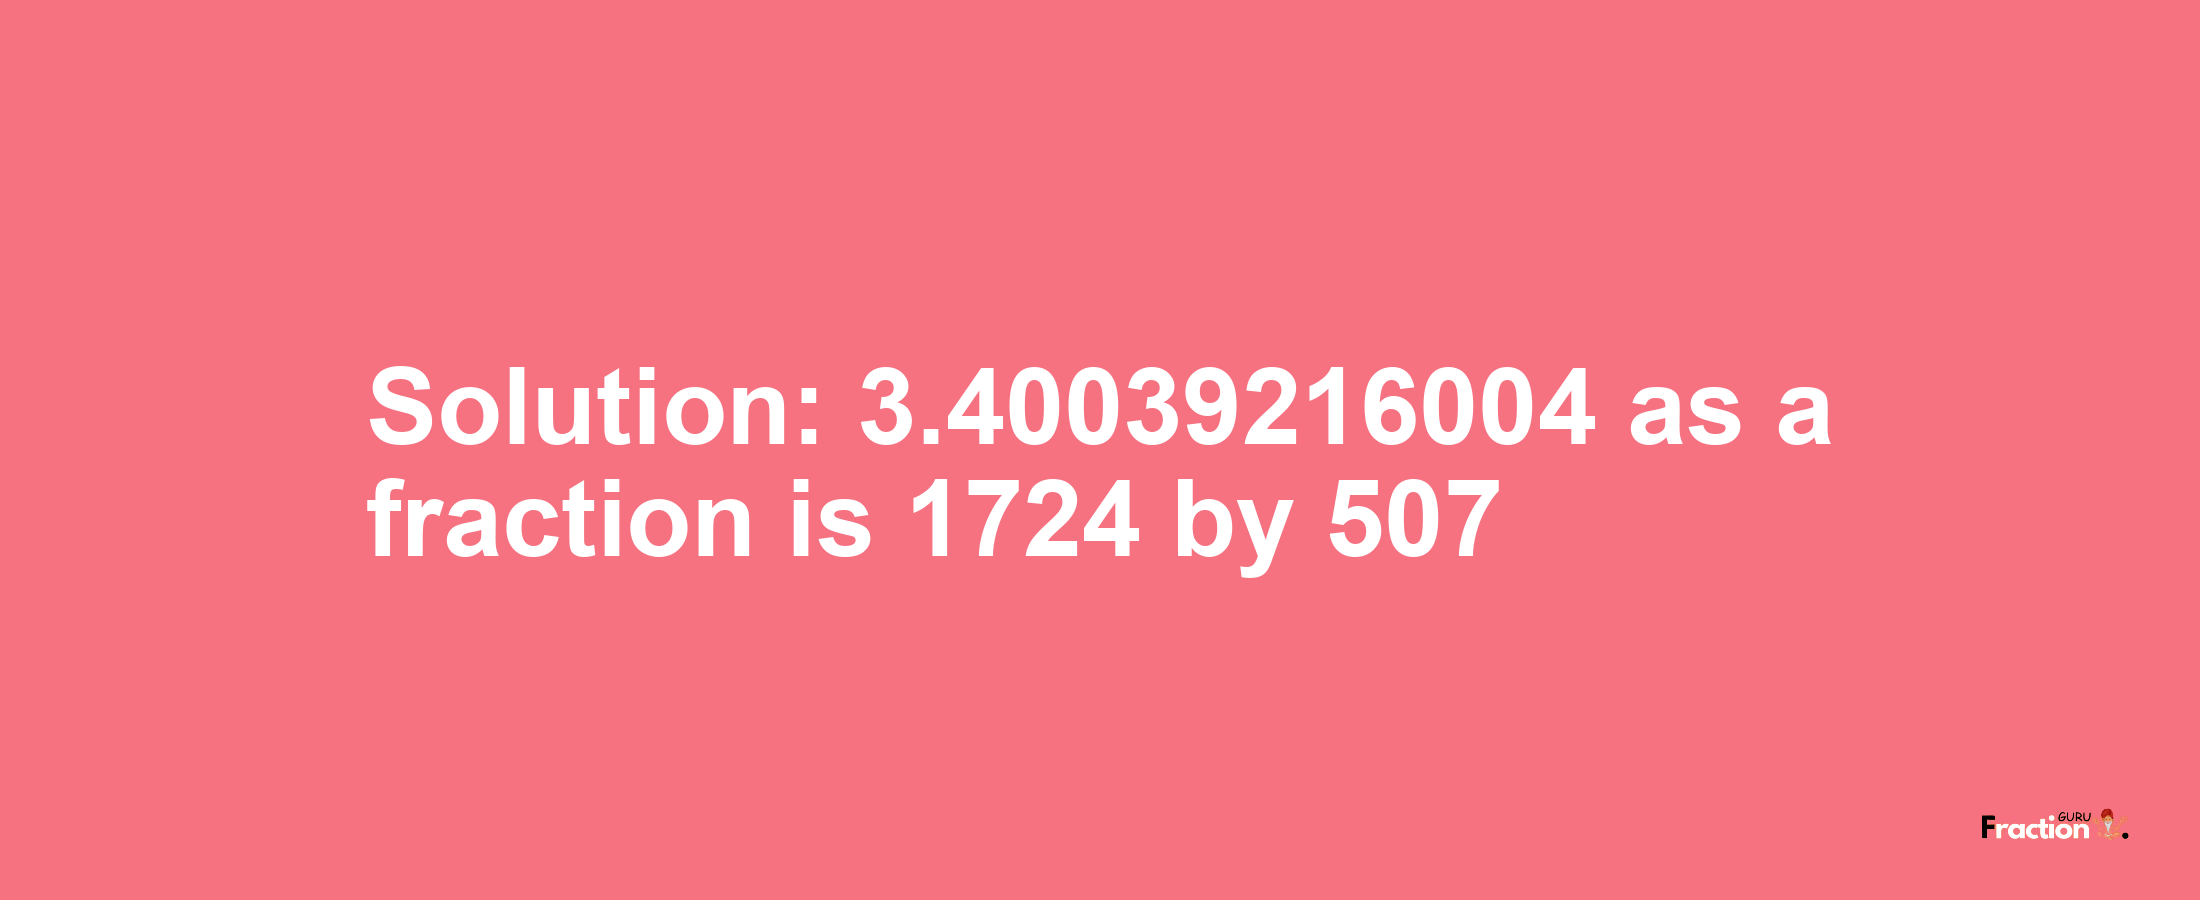 Solution:3.40039216004 as a fraction is 1724/507